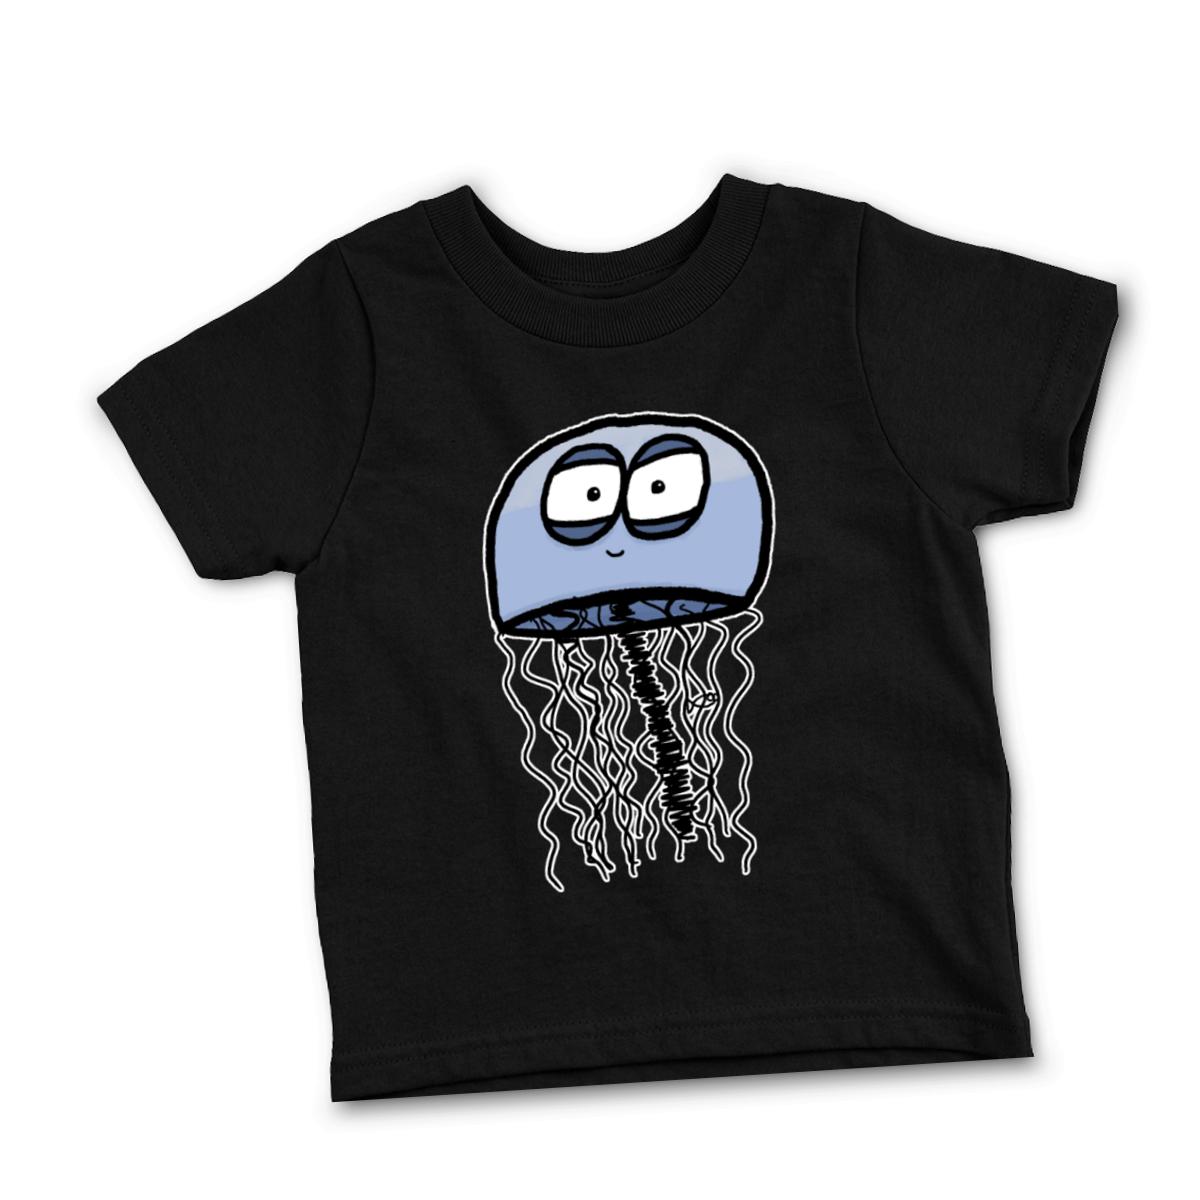 Jelly Fish Toddler Tee 4T black